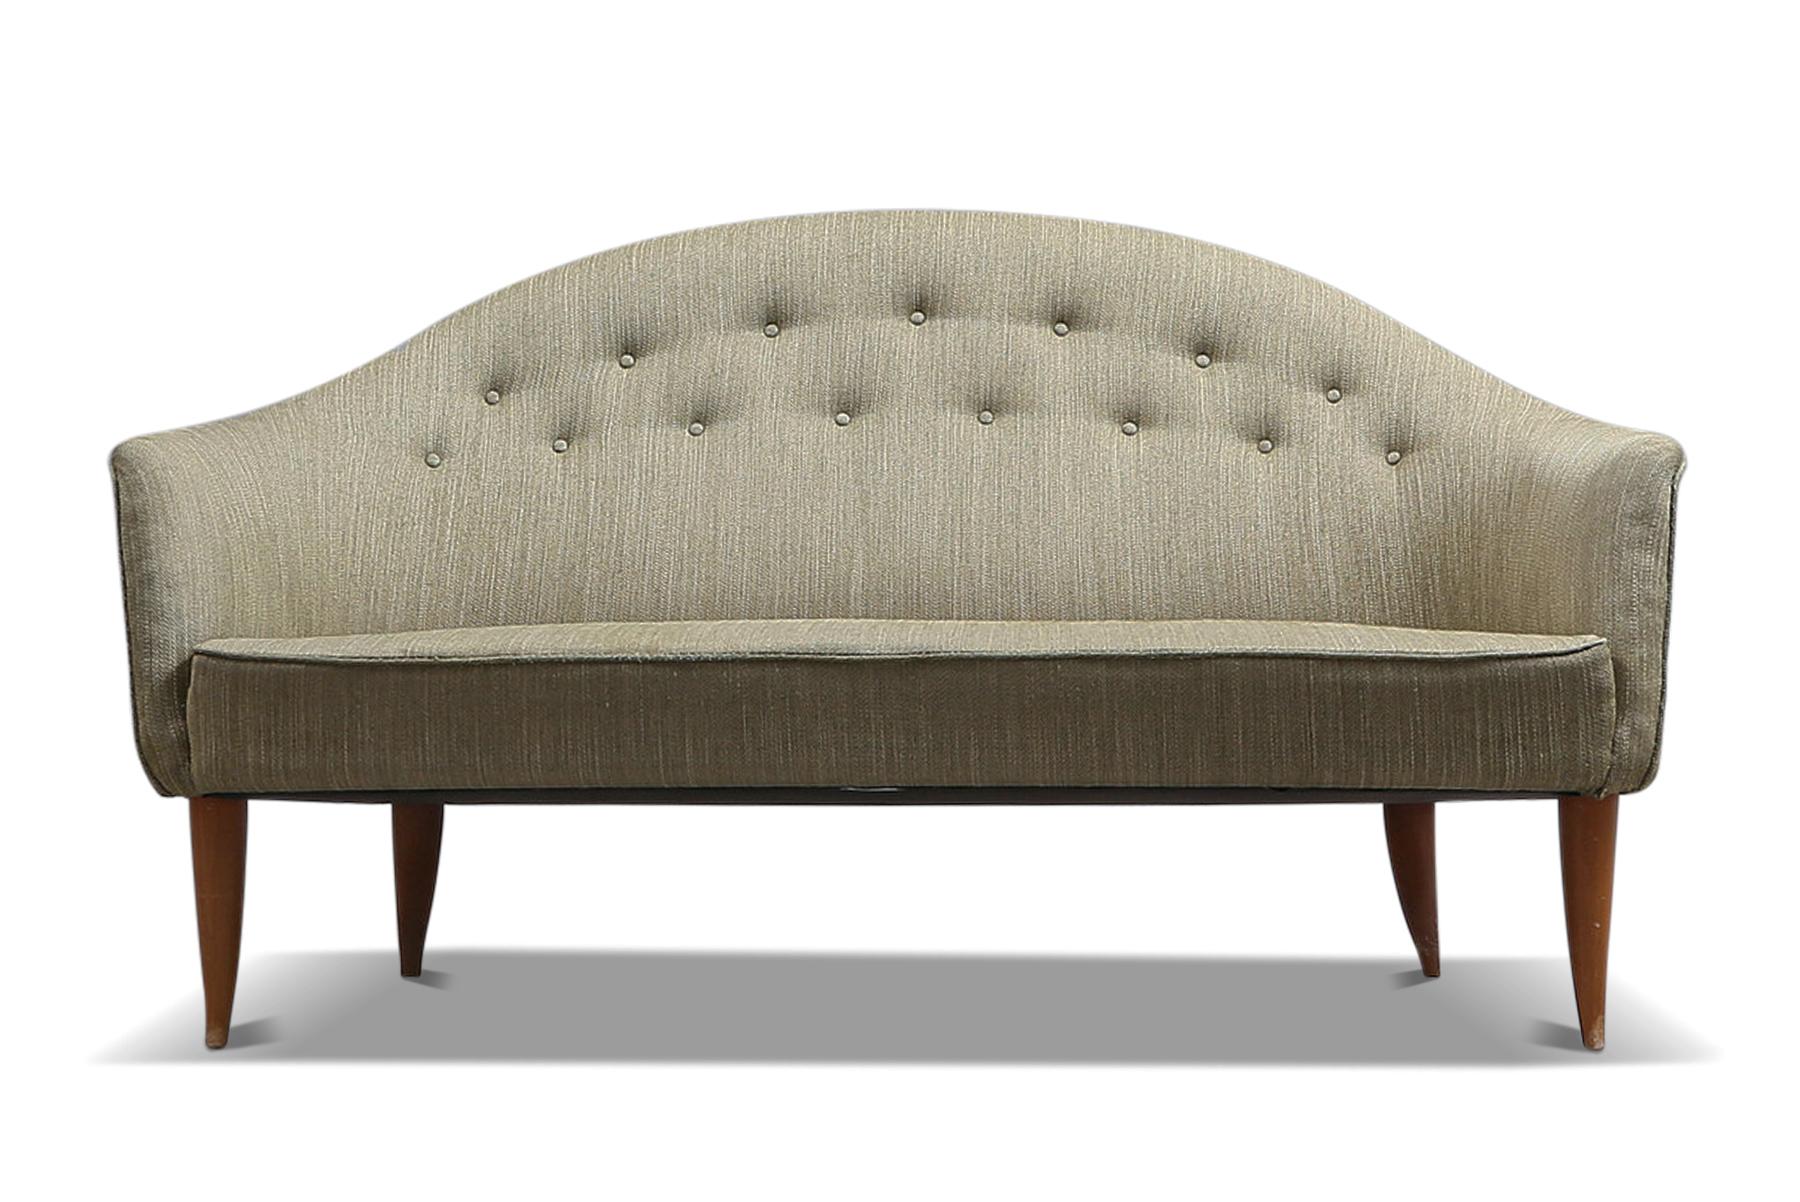 “Paradiset” Sofa by Kerstin Hörlin-Holmquist In Excellent Condition For Sale In Berkeley, CA